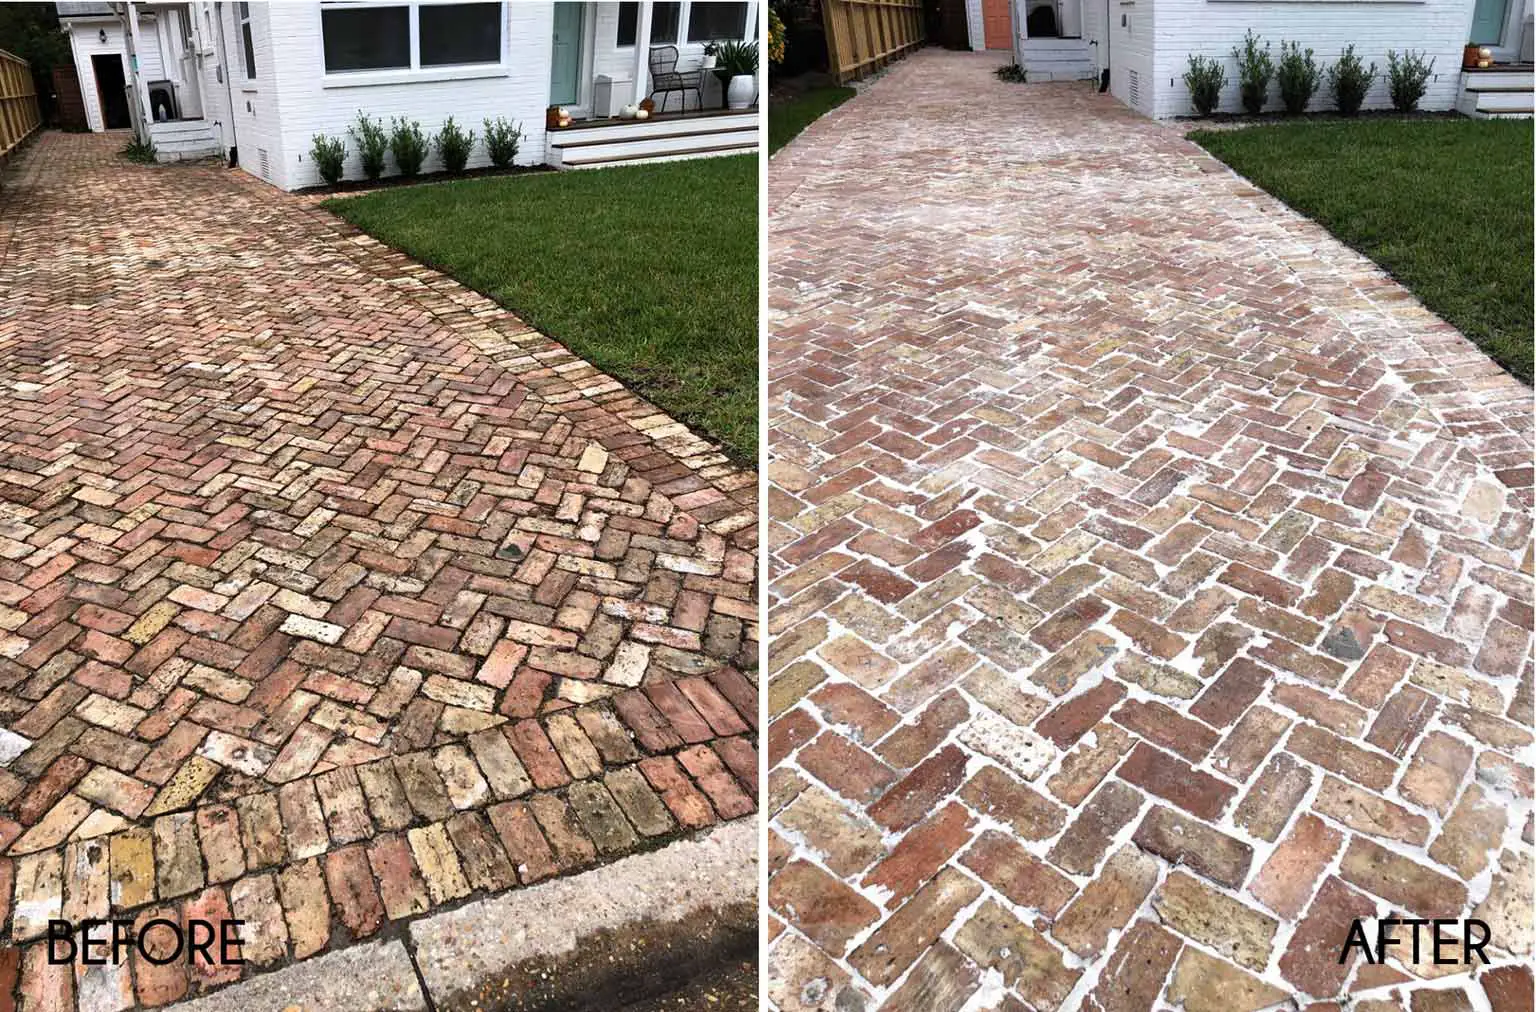 How To Clean Brick Pavery Love, What Can I Use To Clean My Patio Pavers